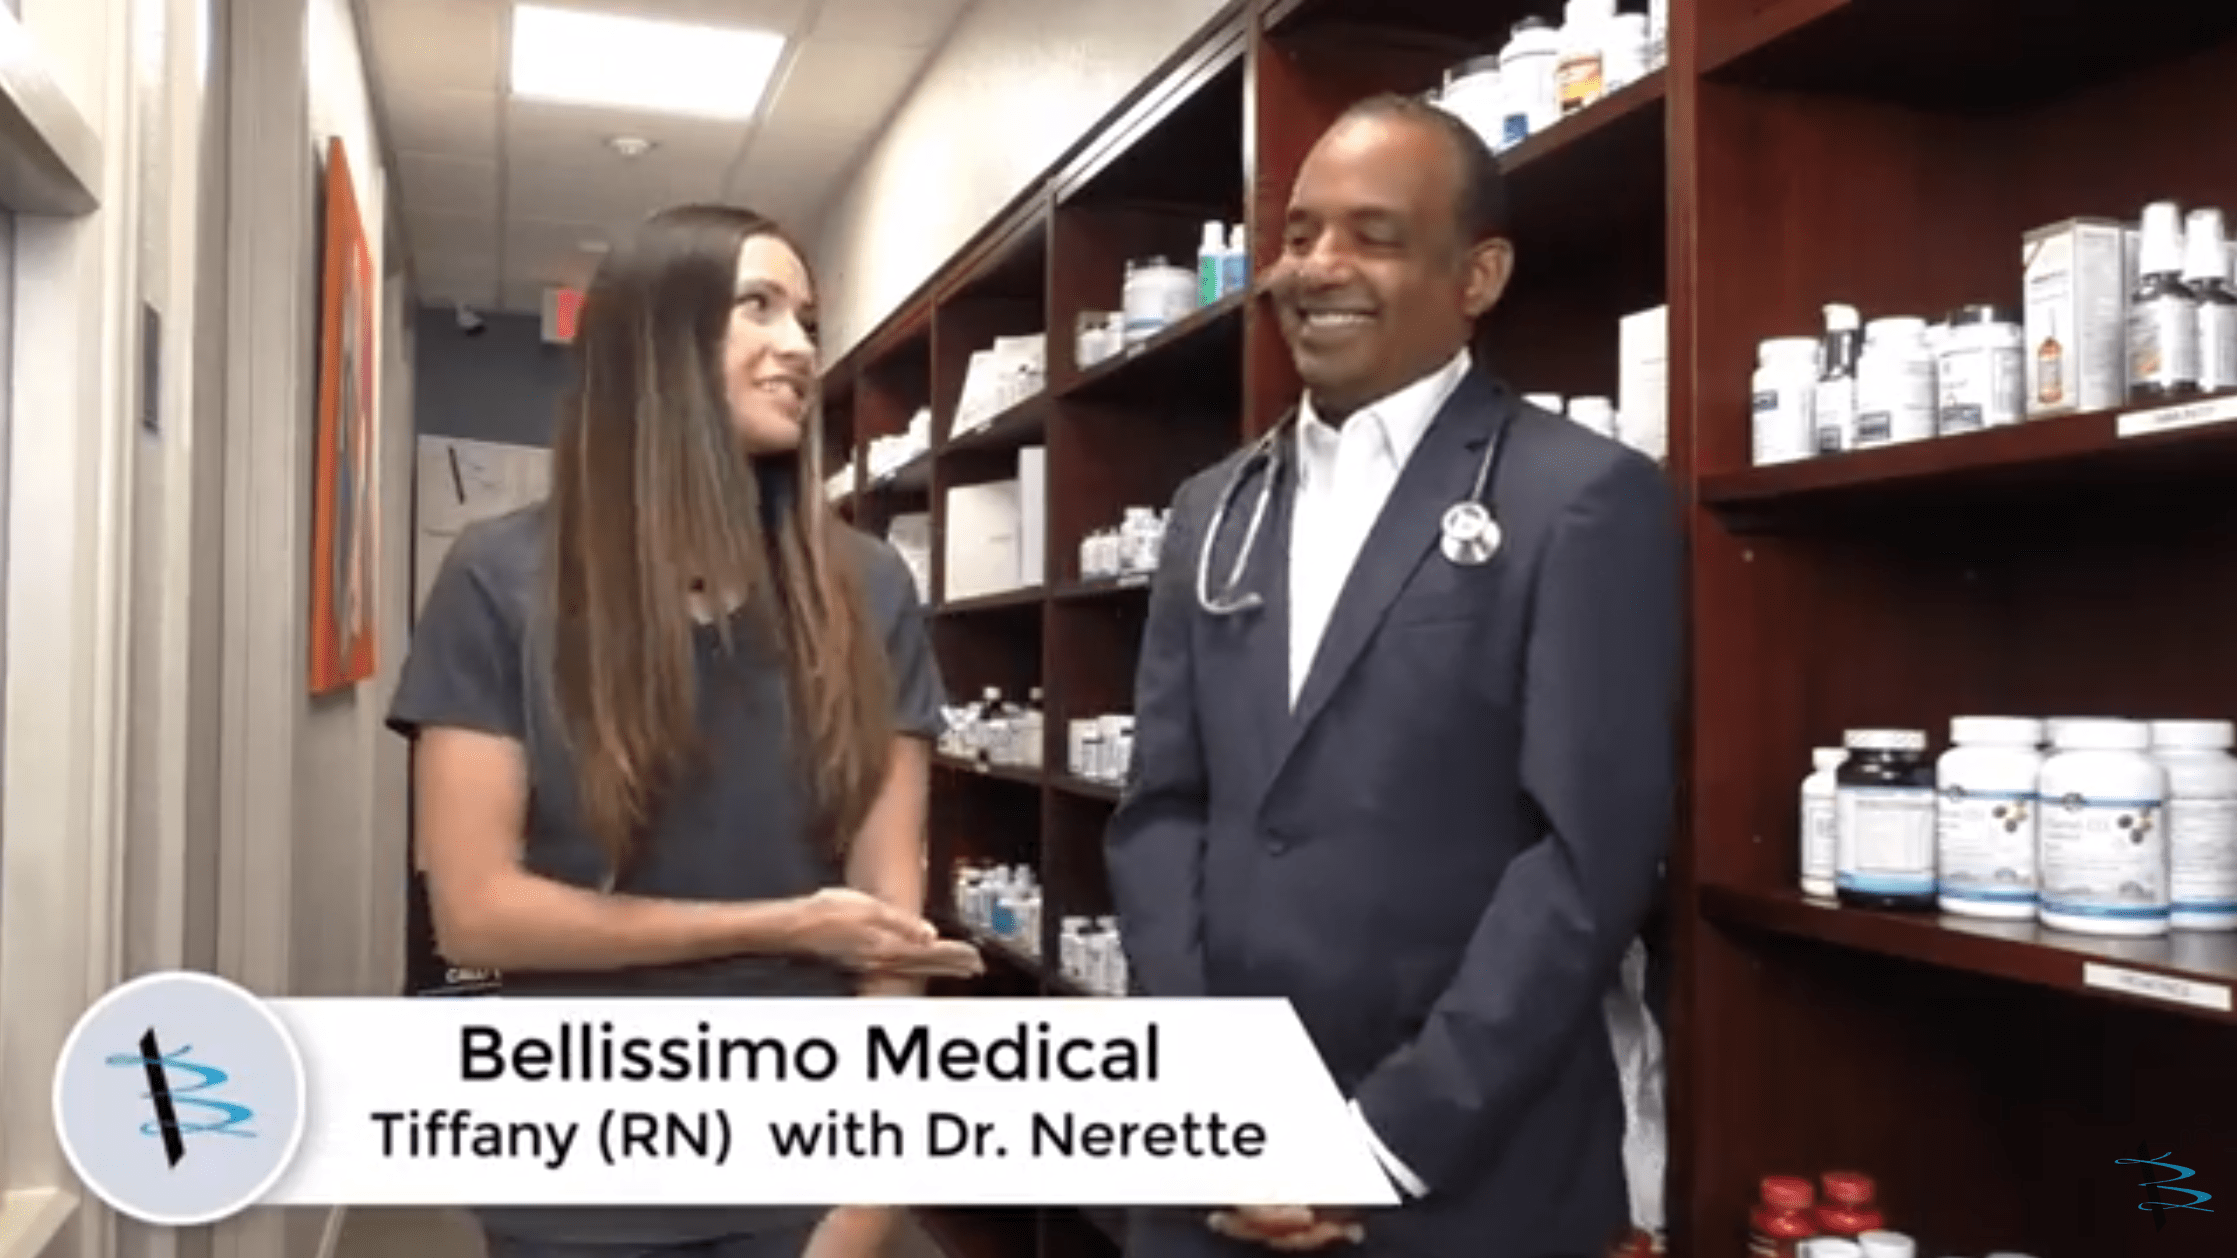 Dr. Nerette with Tiffany (RN) discuss Vitamins and Nutrition